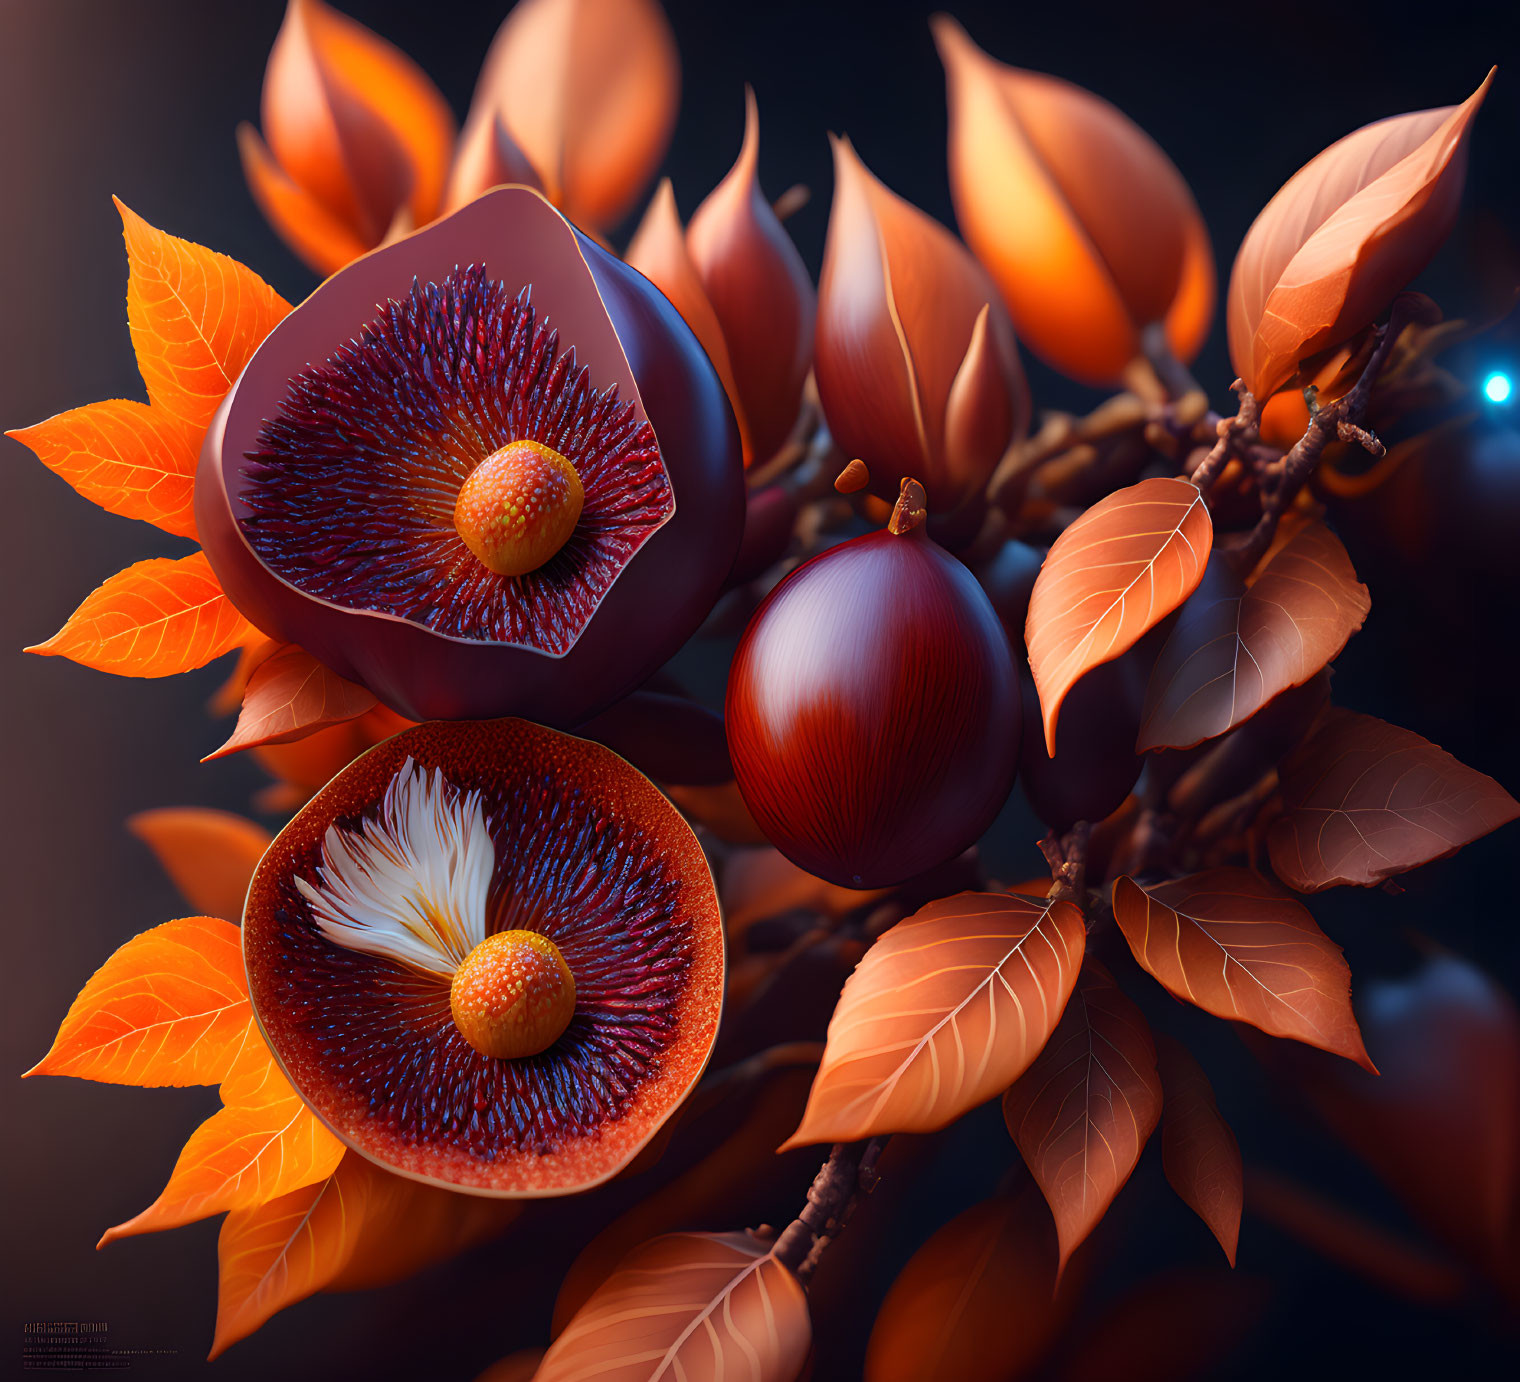 Colorful digital art: branch with orange leaves & exotic fruits cut open showing detailed seed patterns